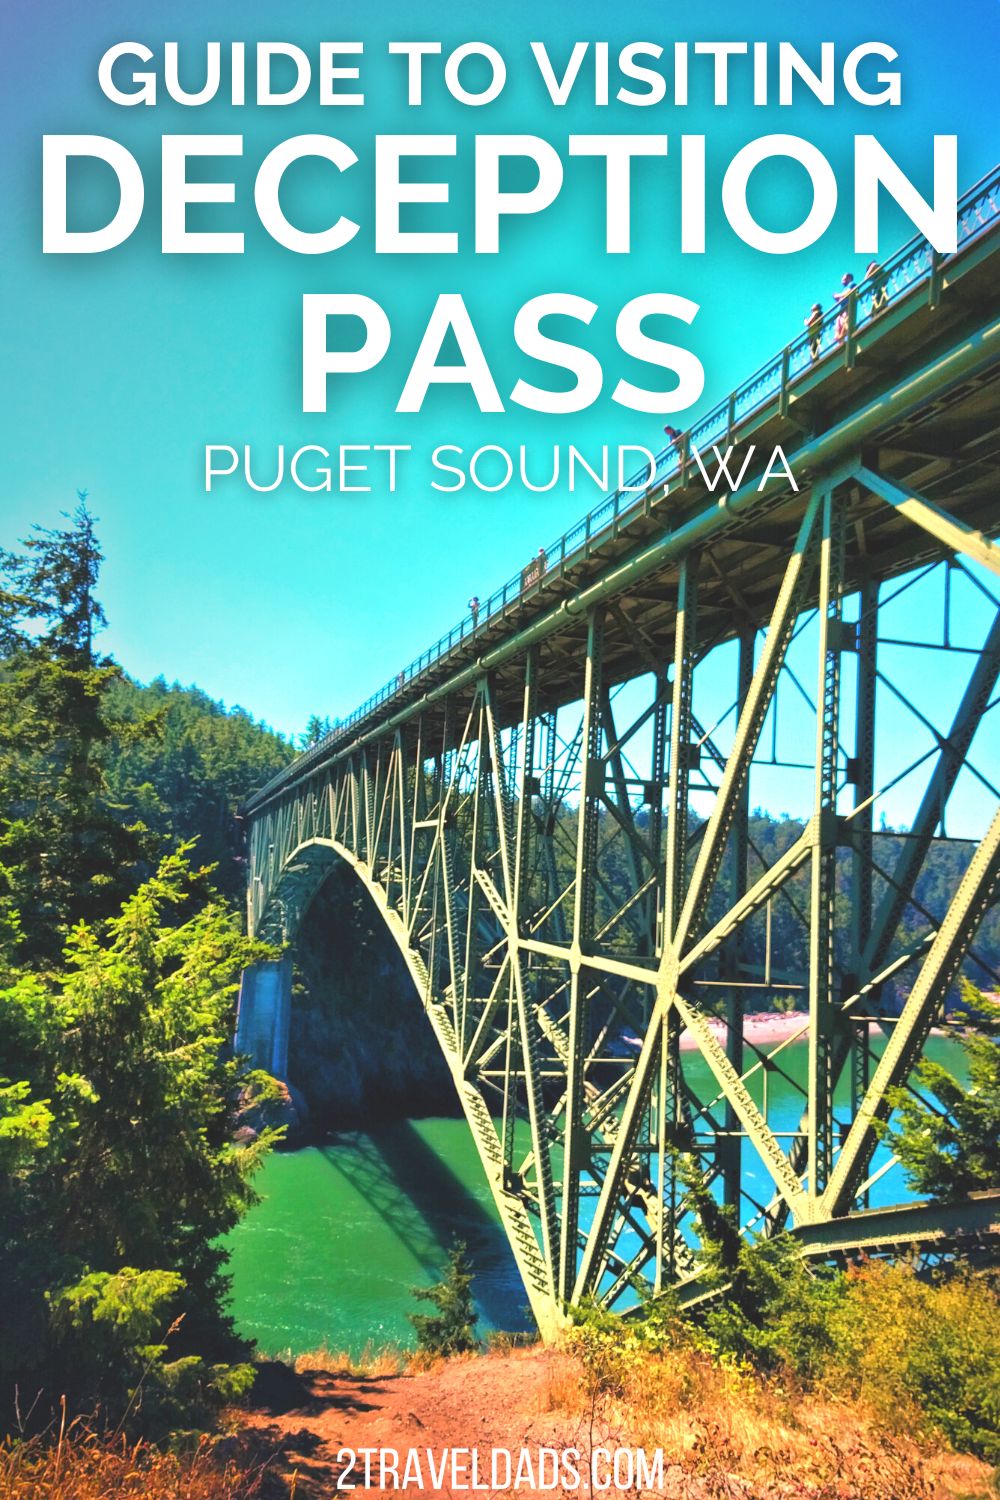 Deception Pass is one of the most unique hiking spots in the Puget Sound area. The state park includes a jagged island, deep swirling waters and beautiful beaches. Find out more about this easy weekend getaway from Seattle.